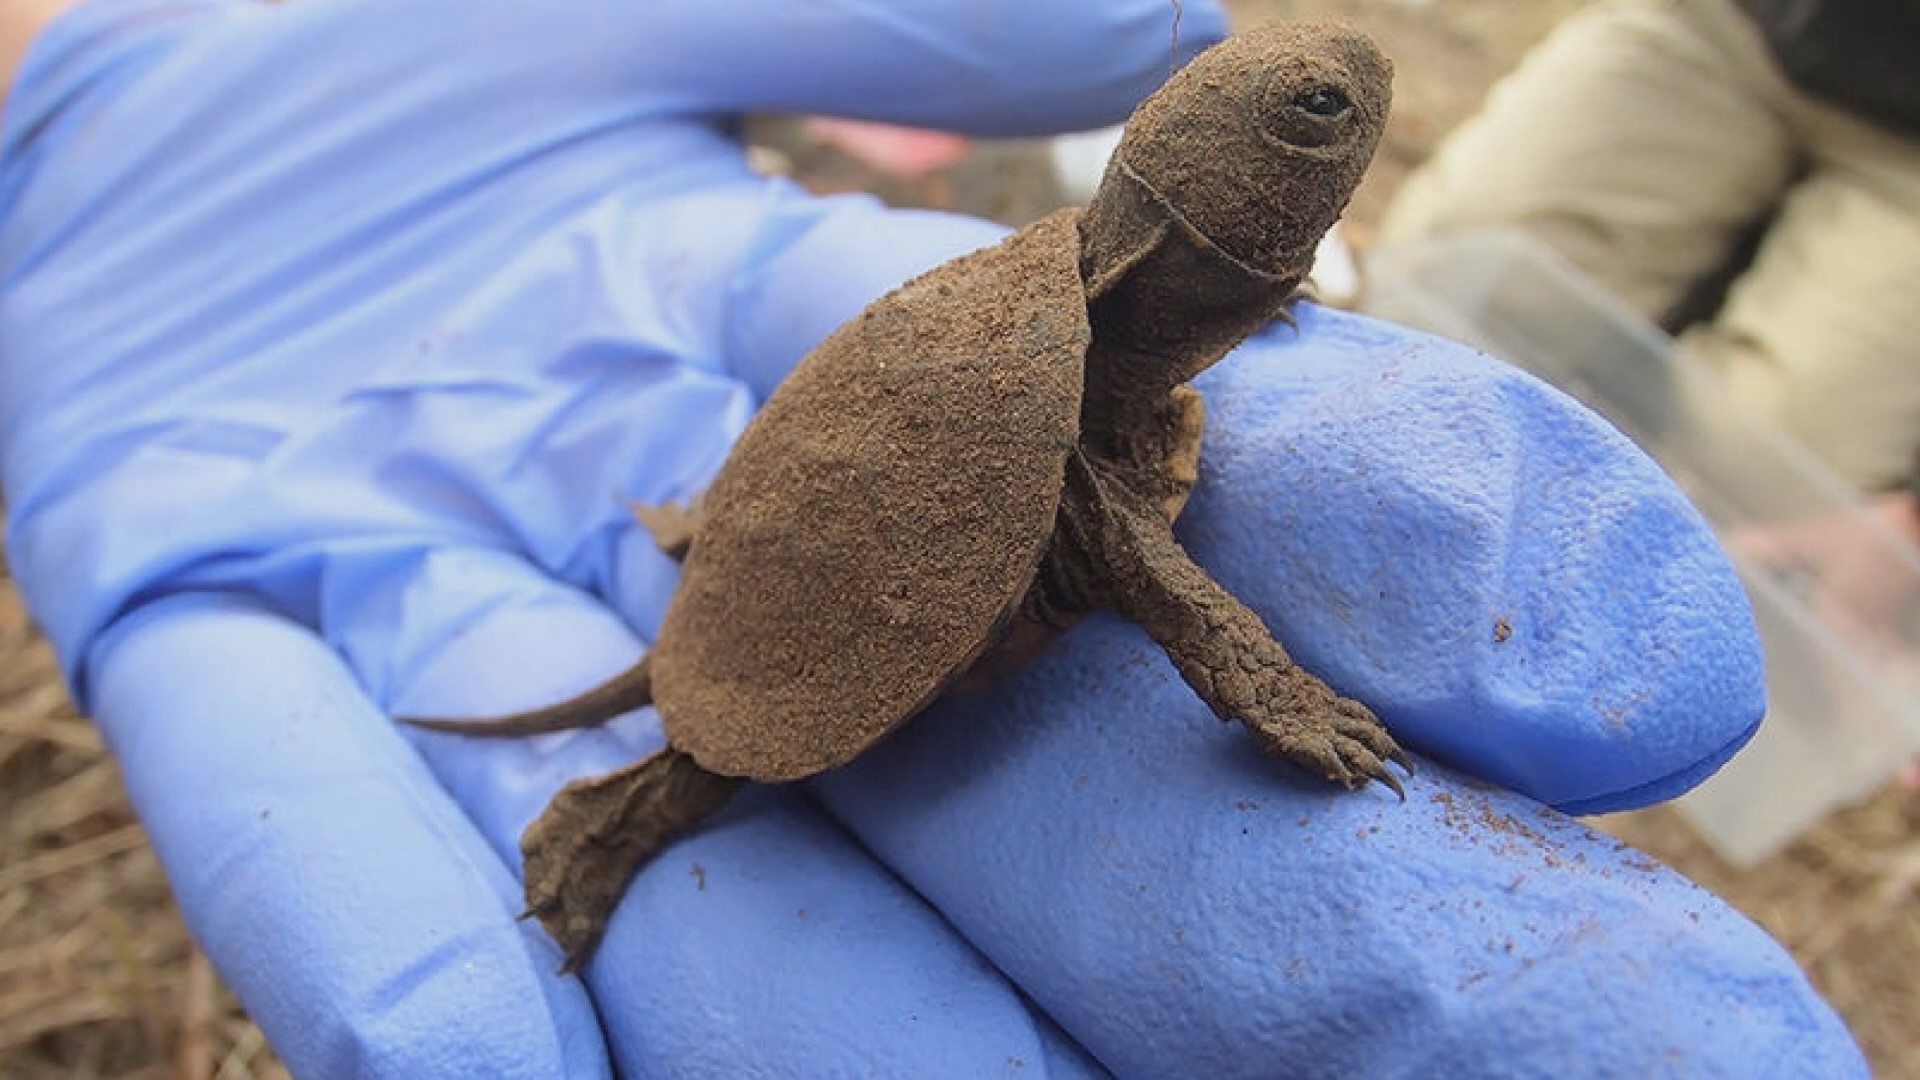 The Oregon Zoo helps endangered Western pond turtles through a 'head-starting' program. KGW Sunrise's Drew Carney explains how they're protecting the tiny turtles.